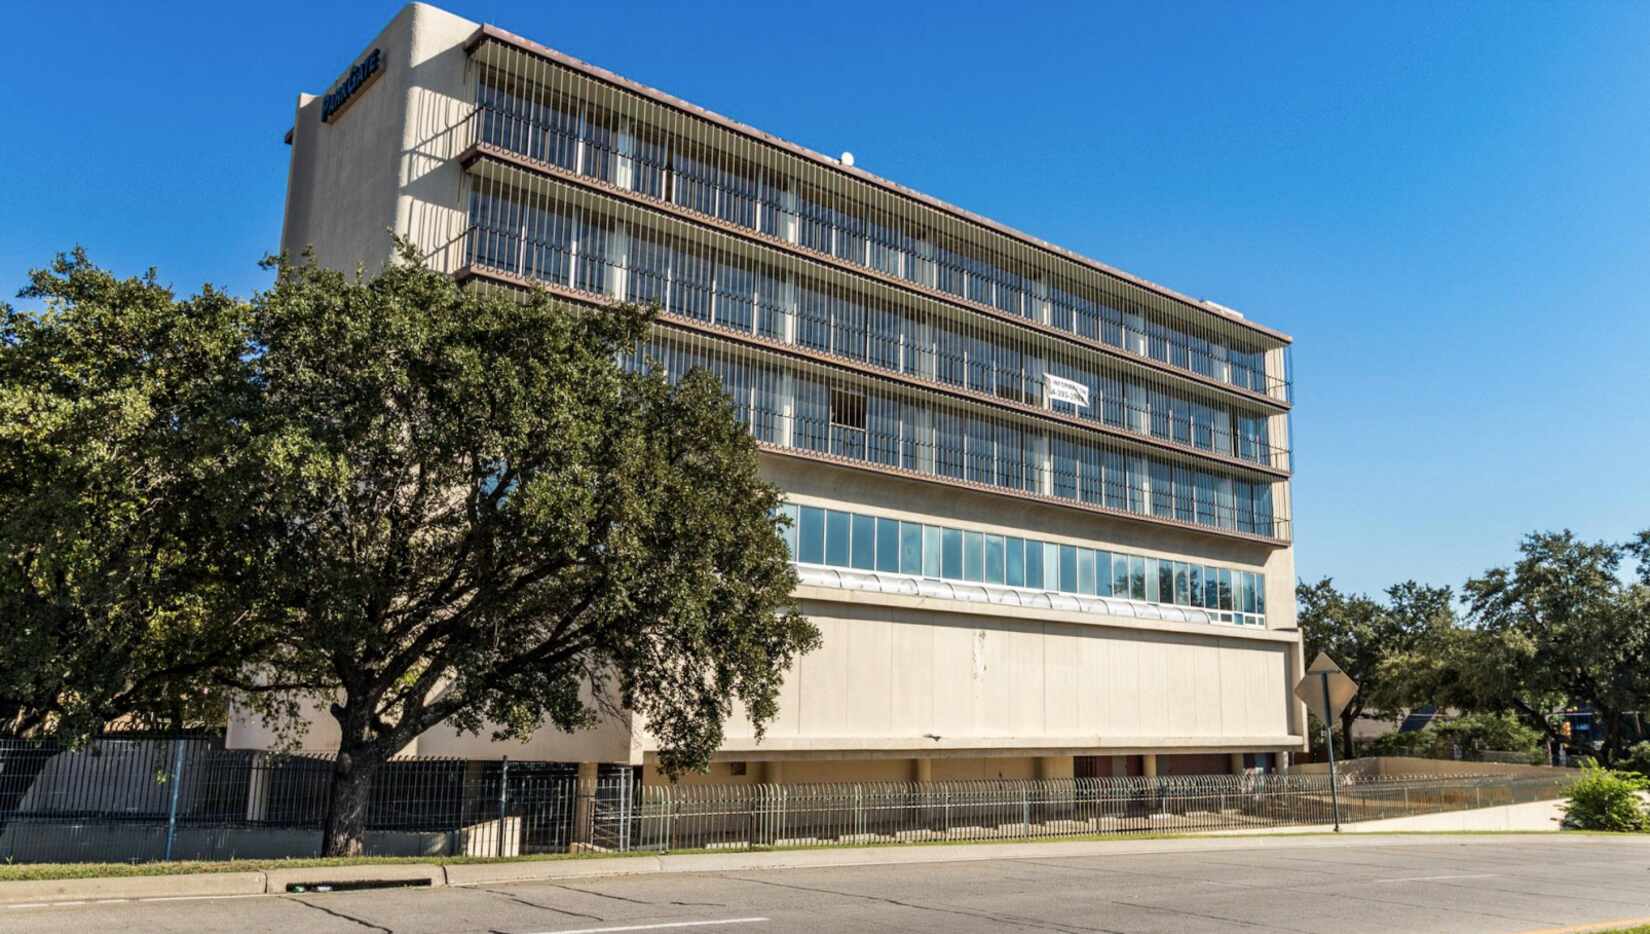 The former Braniff International Airways hostess college building on the Dallas North Tollway.